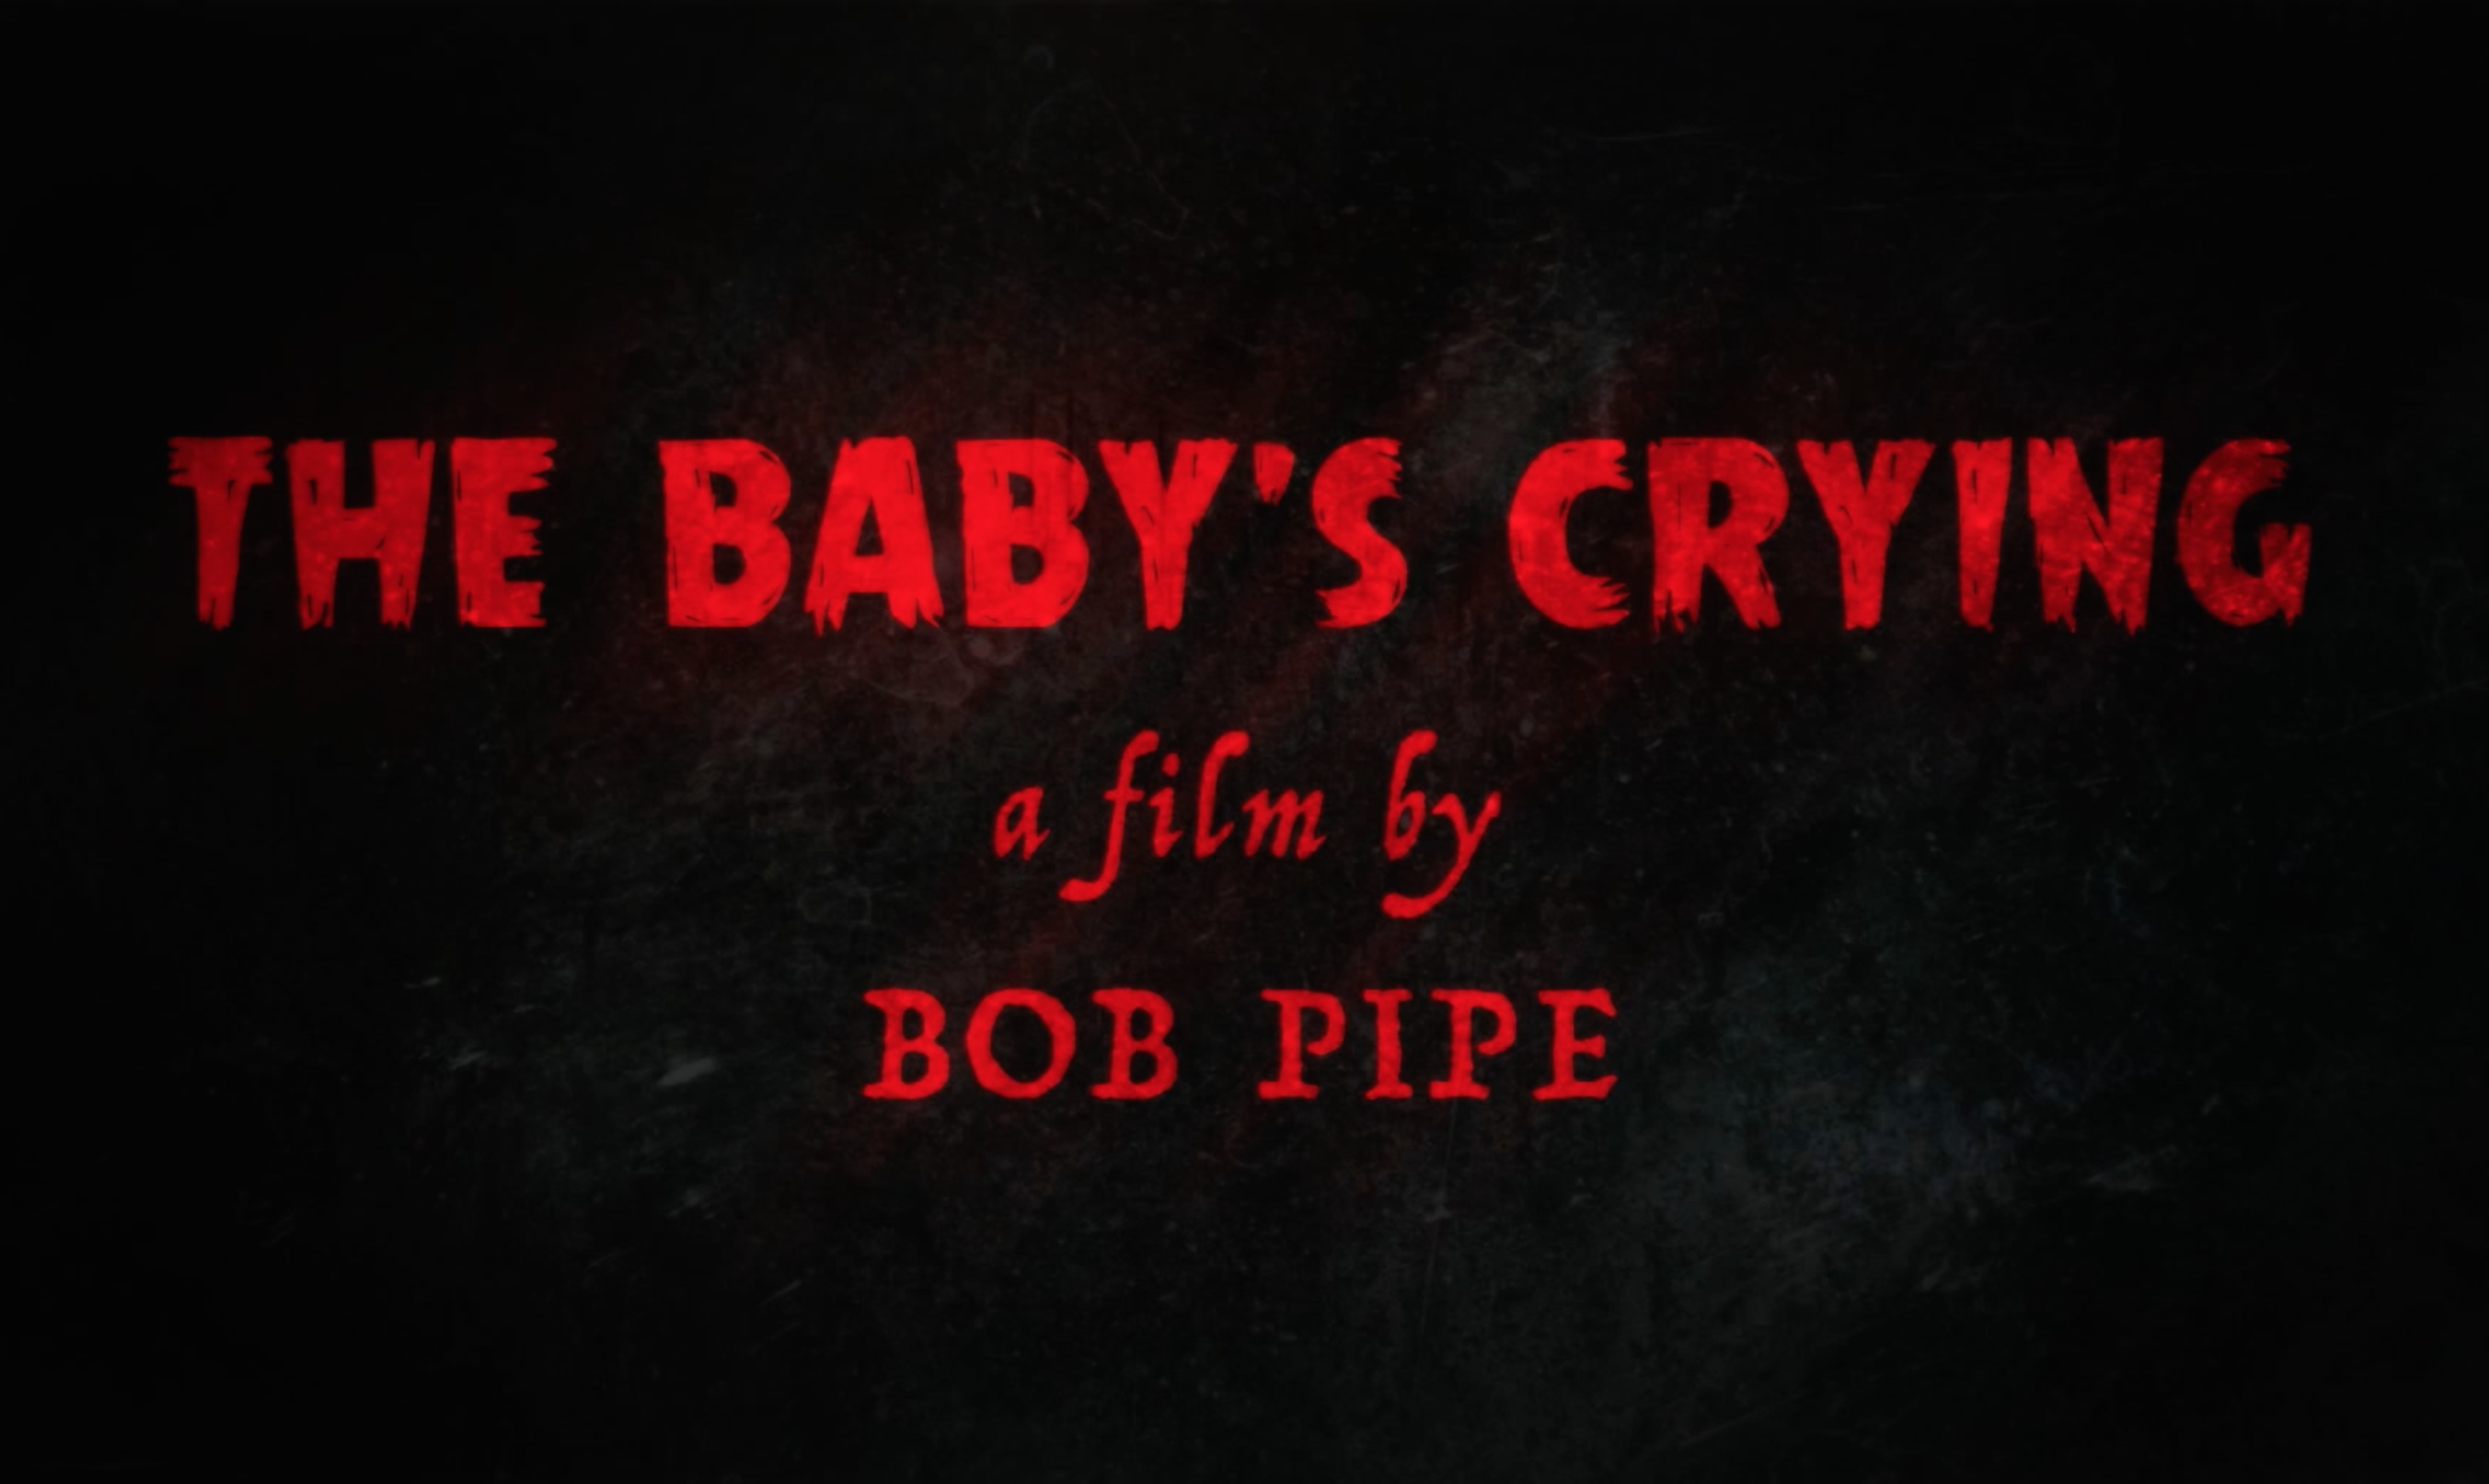   WATCH ON YOUTUBE   Written, directed, produced &amp; edited by Bob Pipe 